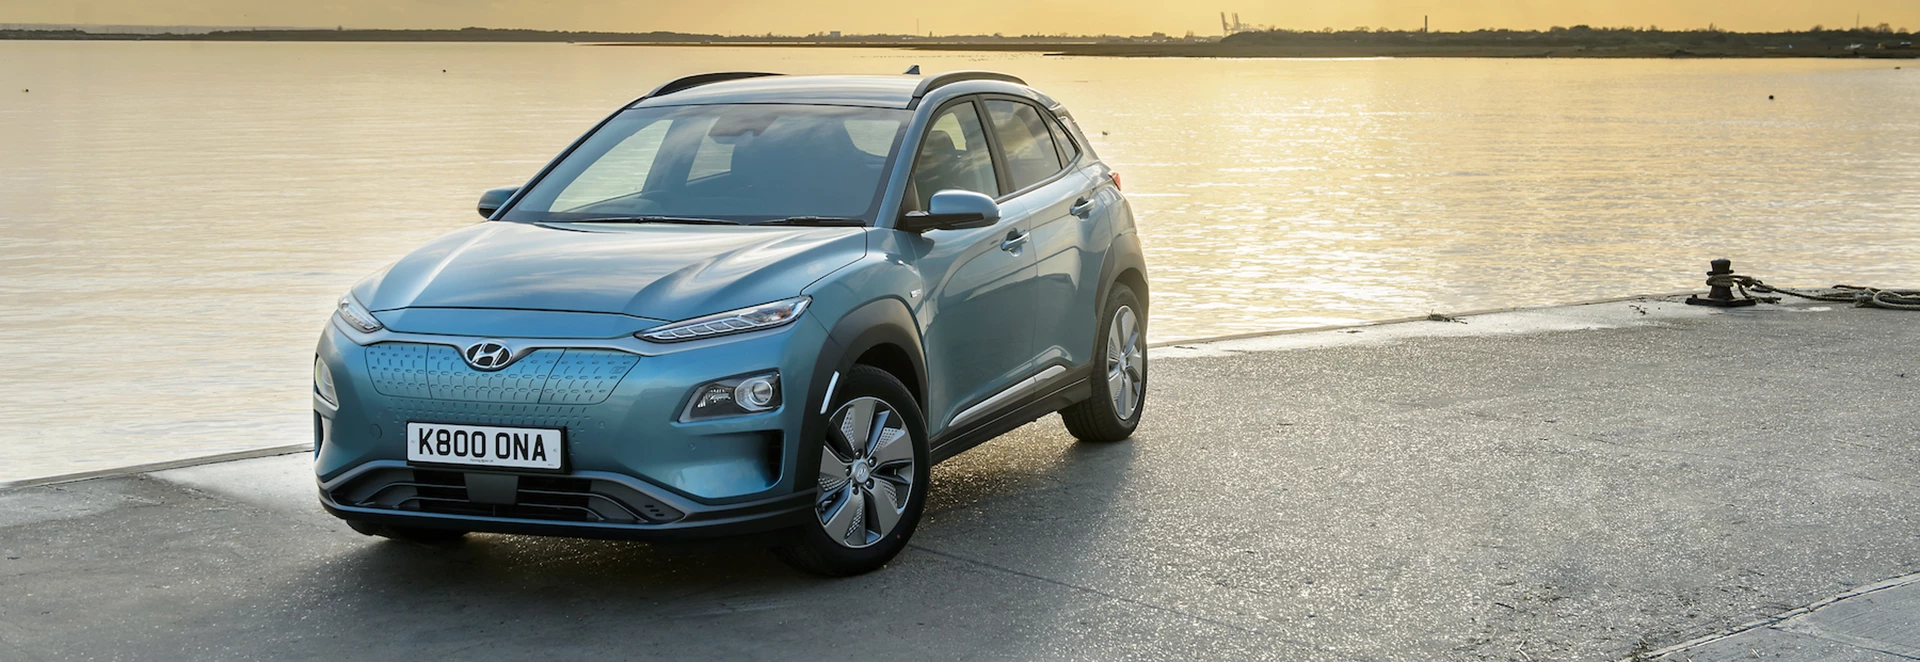 Hyundai launches large EV test drive event to mark World EV Day 